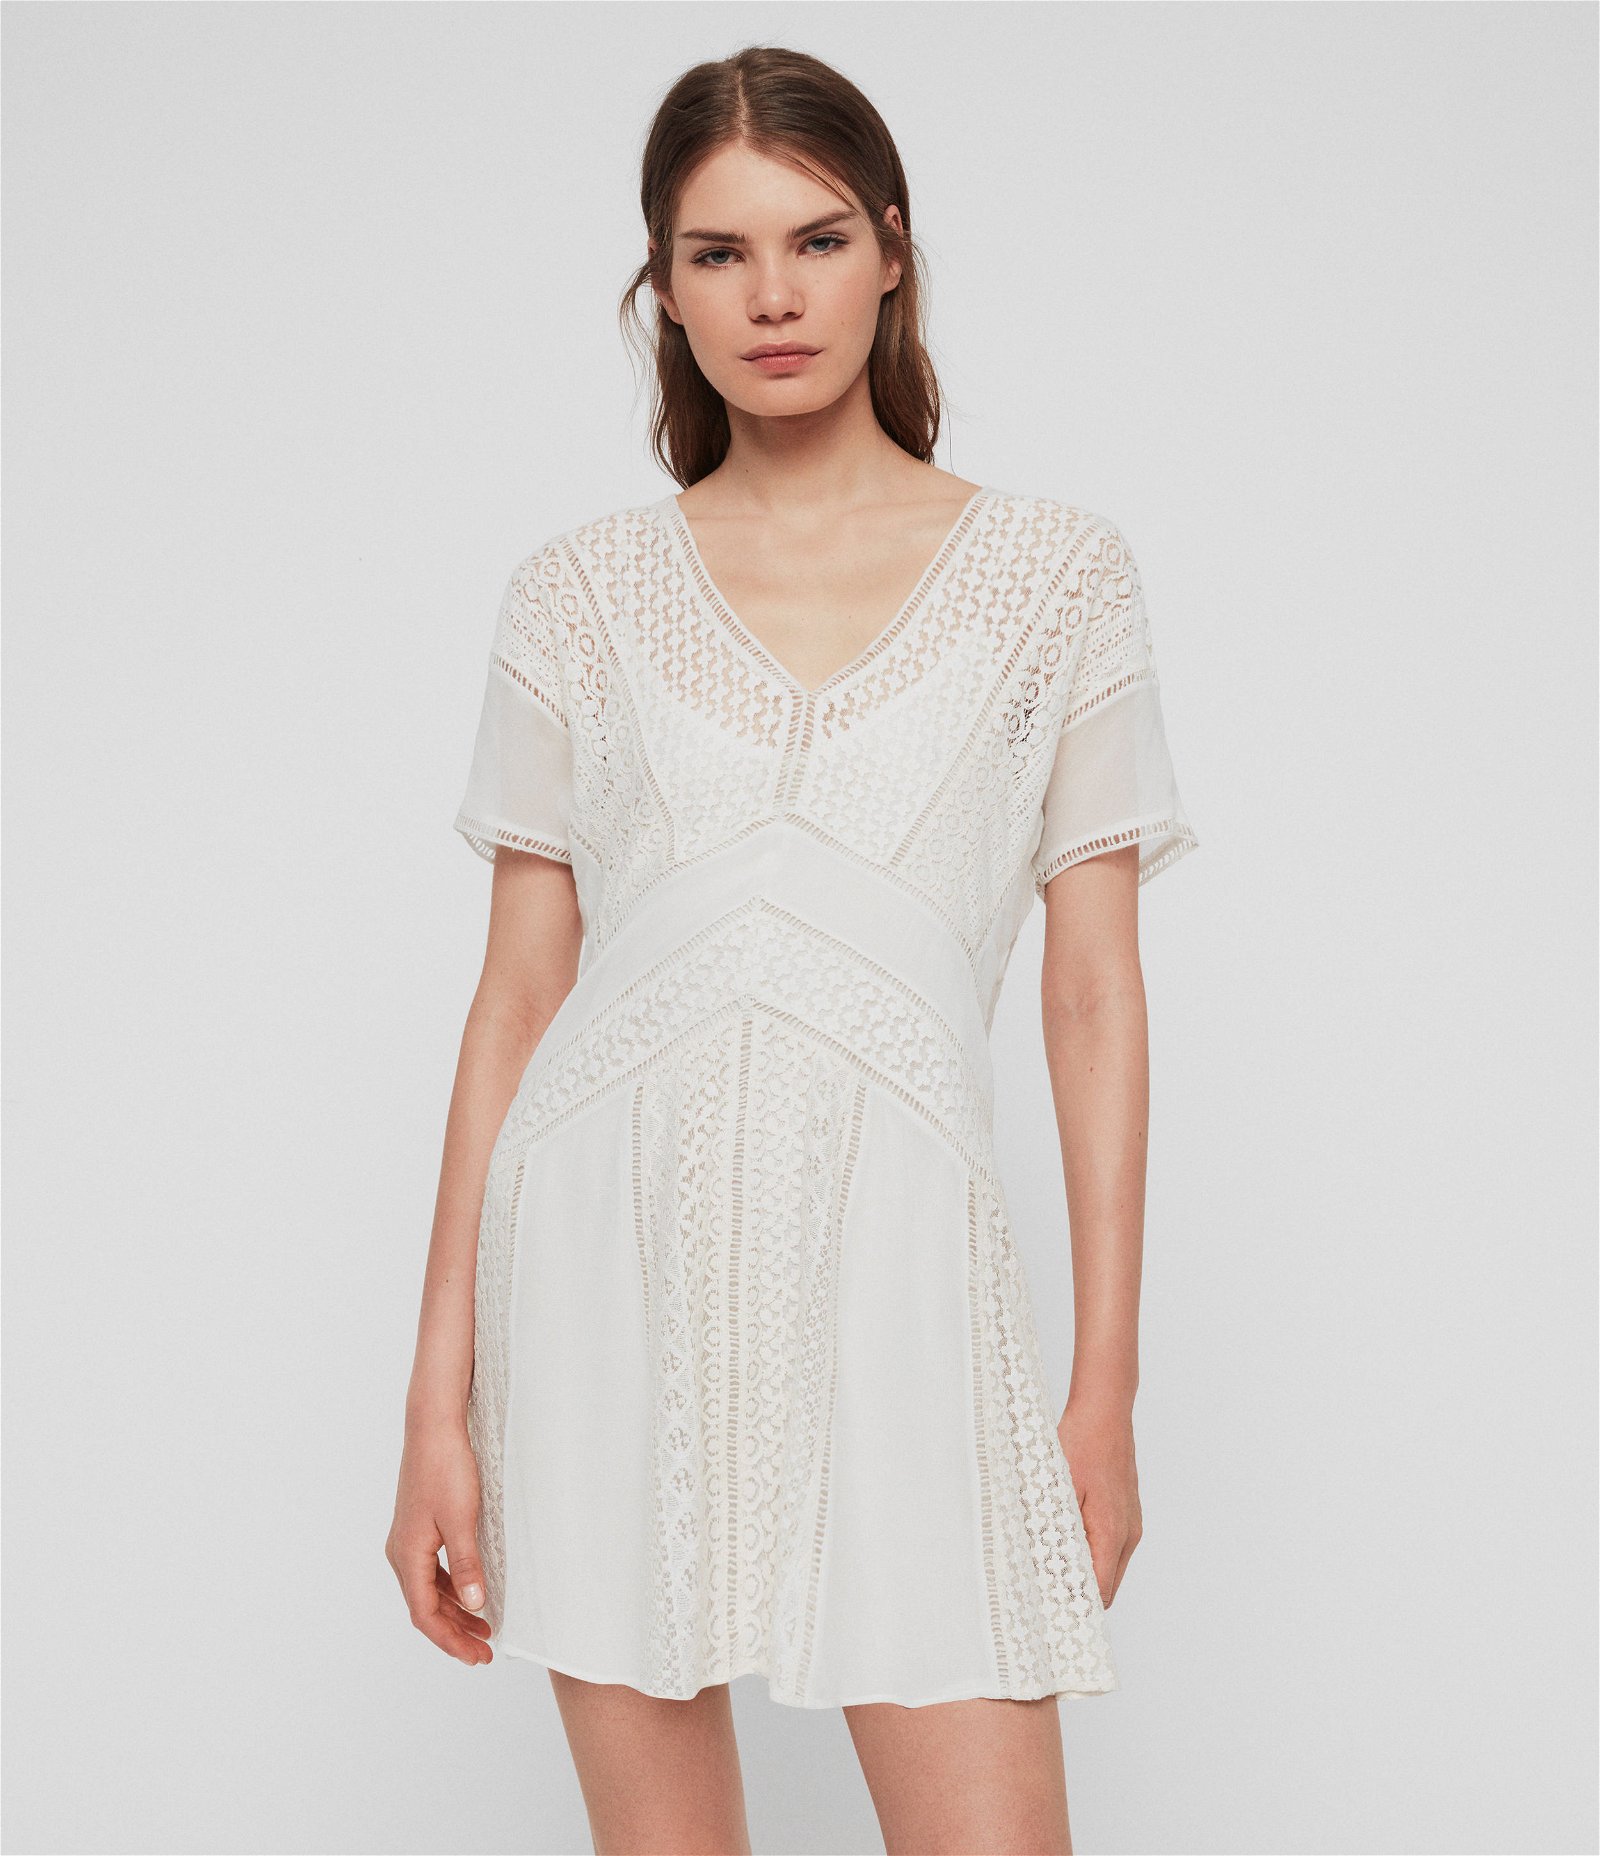 LEATHER LACE DRESS - Oyster-white